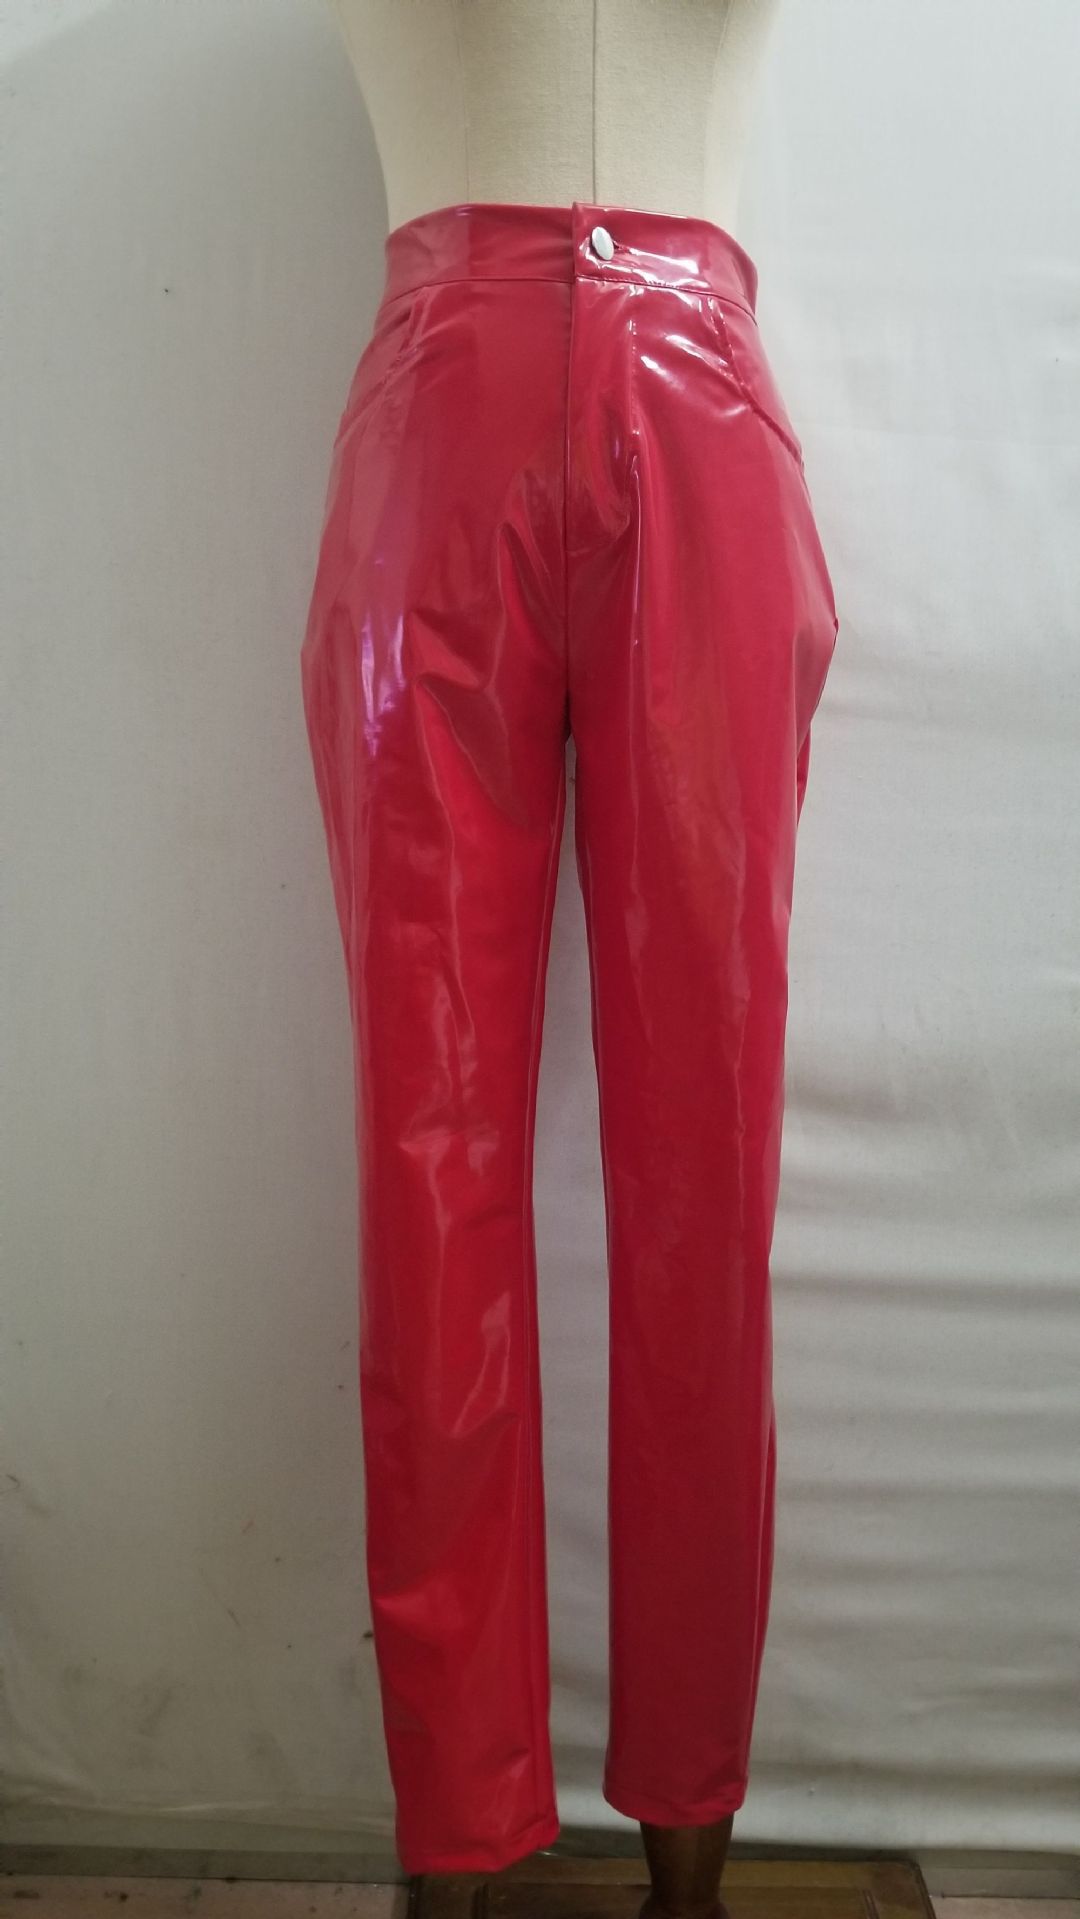 Red Patent PU Leather Pants US$ 10.11 - www.lover-pretty.com